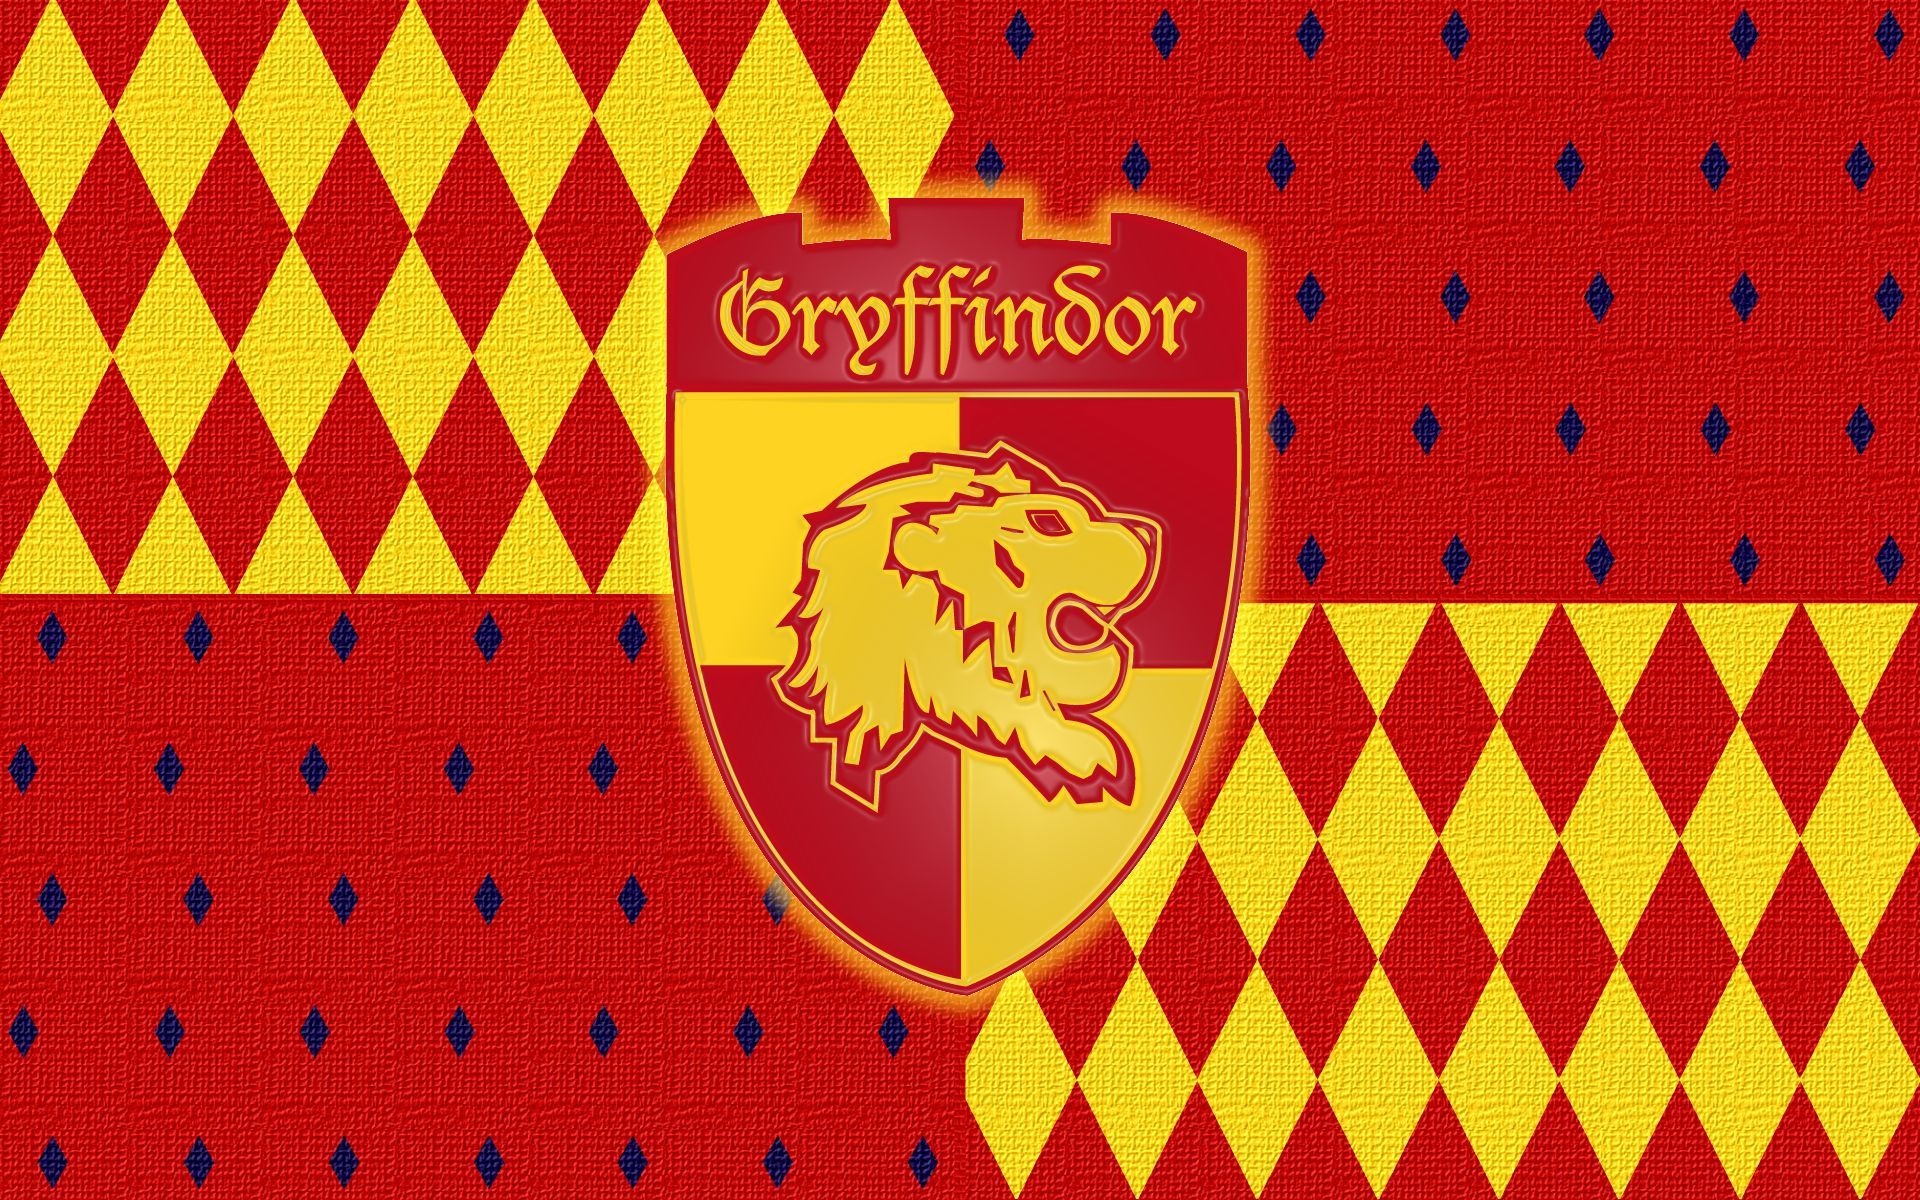 Gryffindor wallpapers, Top choices, House backgrounds, Wallpaper selection, 1920x1200 HD Desktop